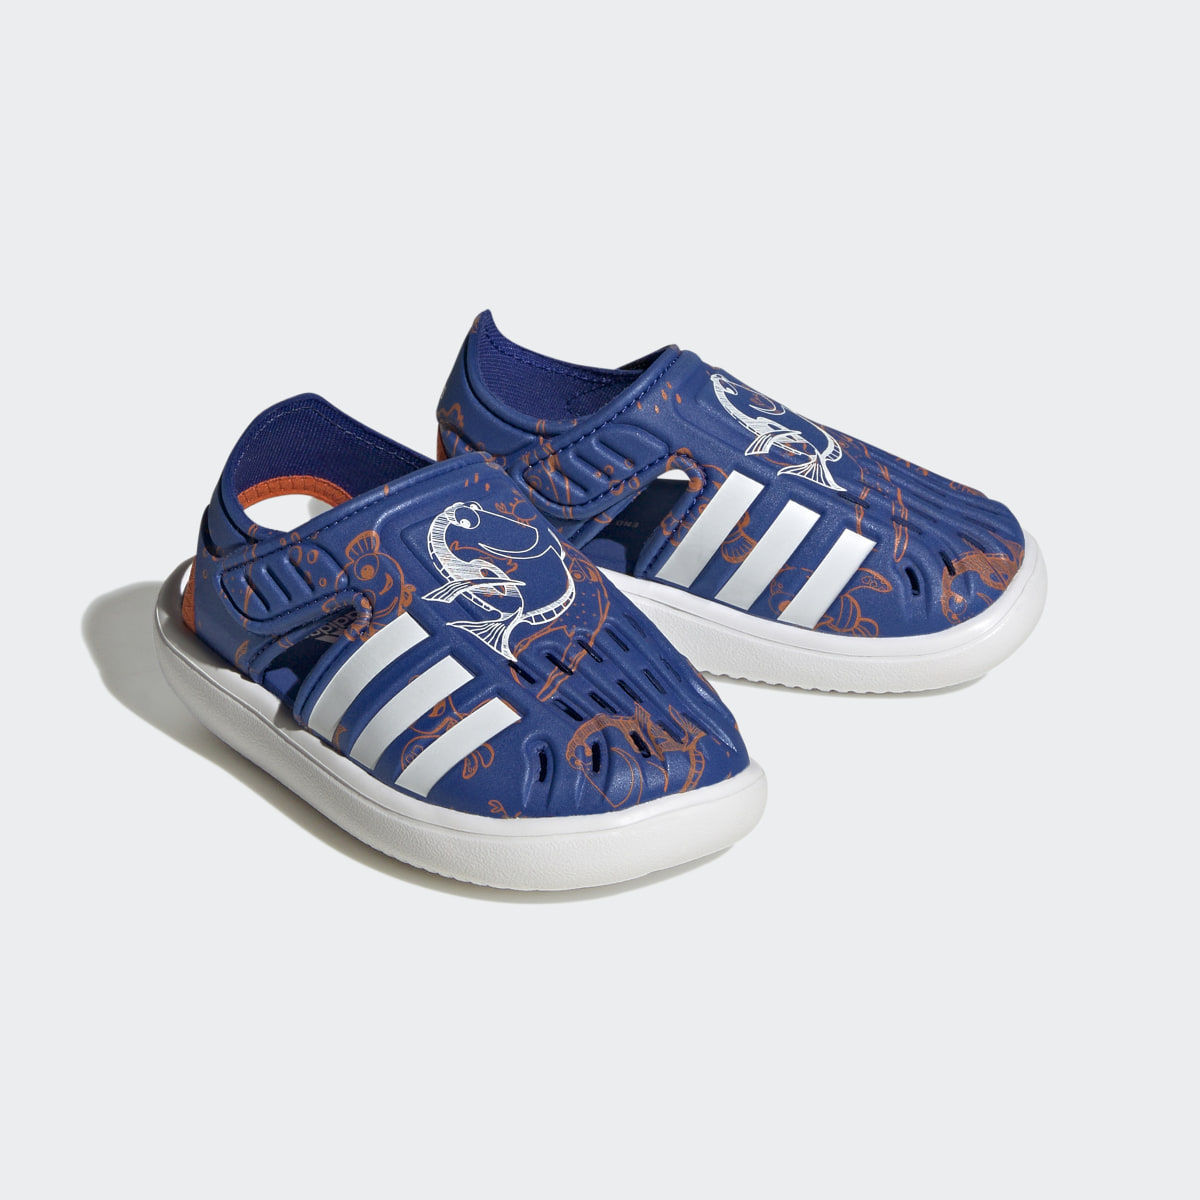 Adidas Sandali Finding Nemo and Dory Closed Toe Summer Water. 5